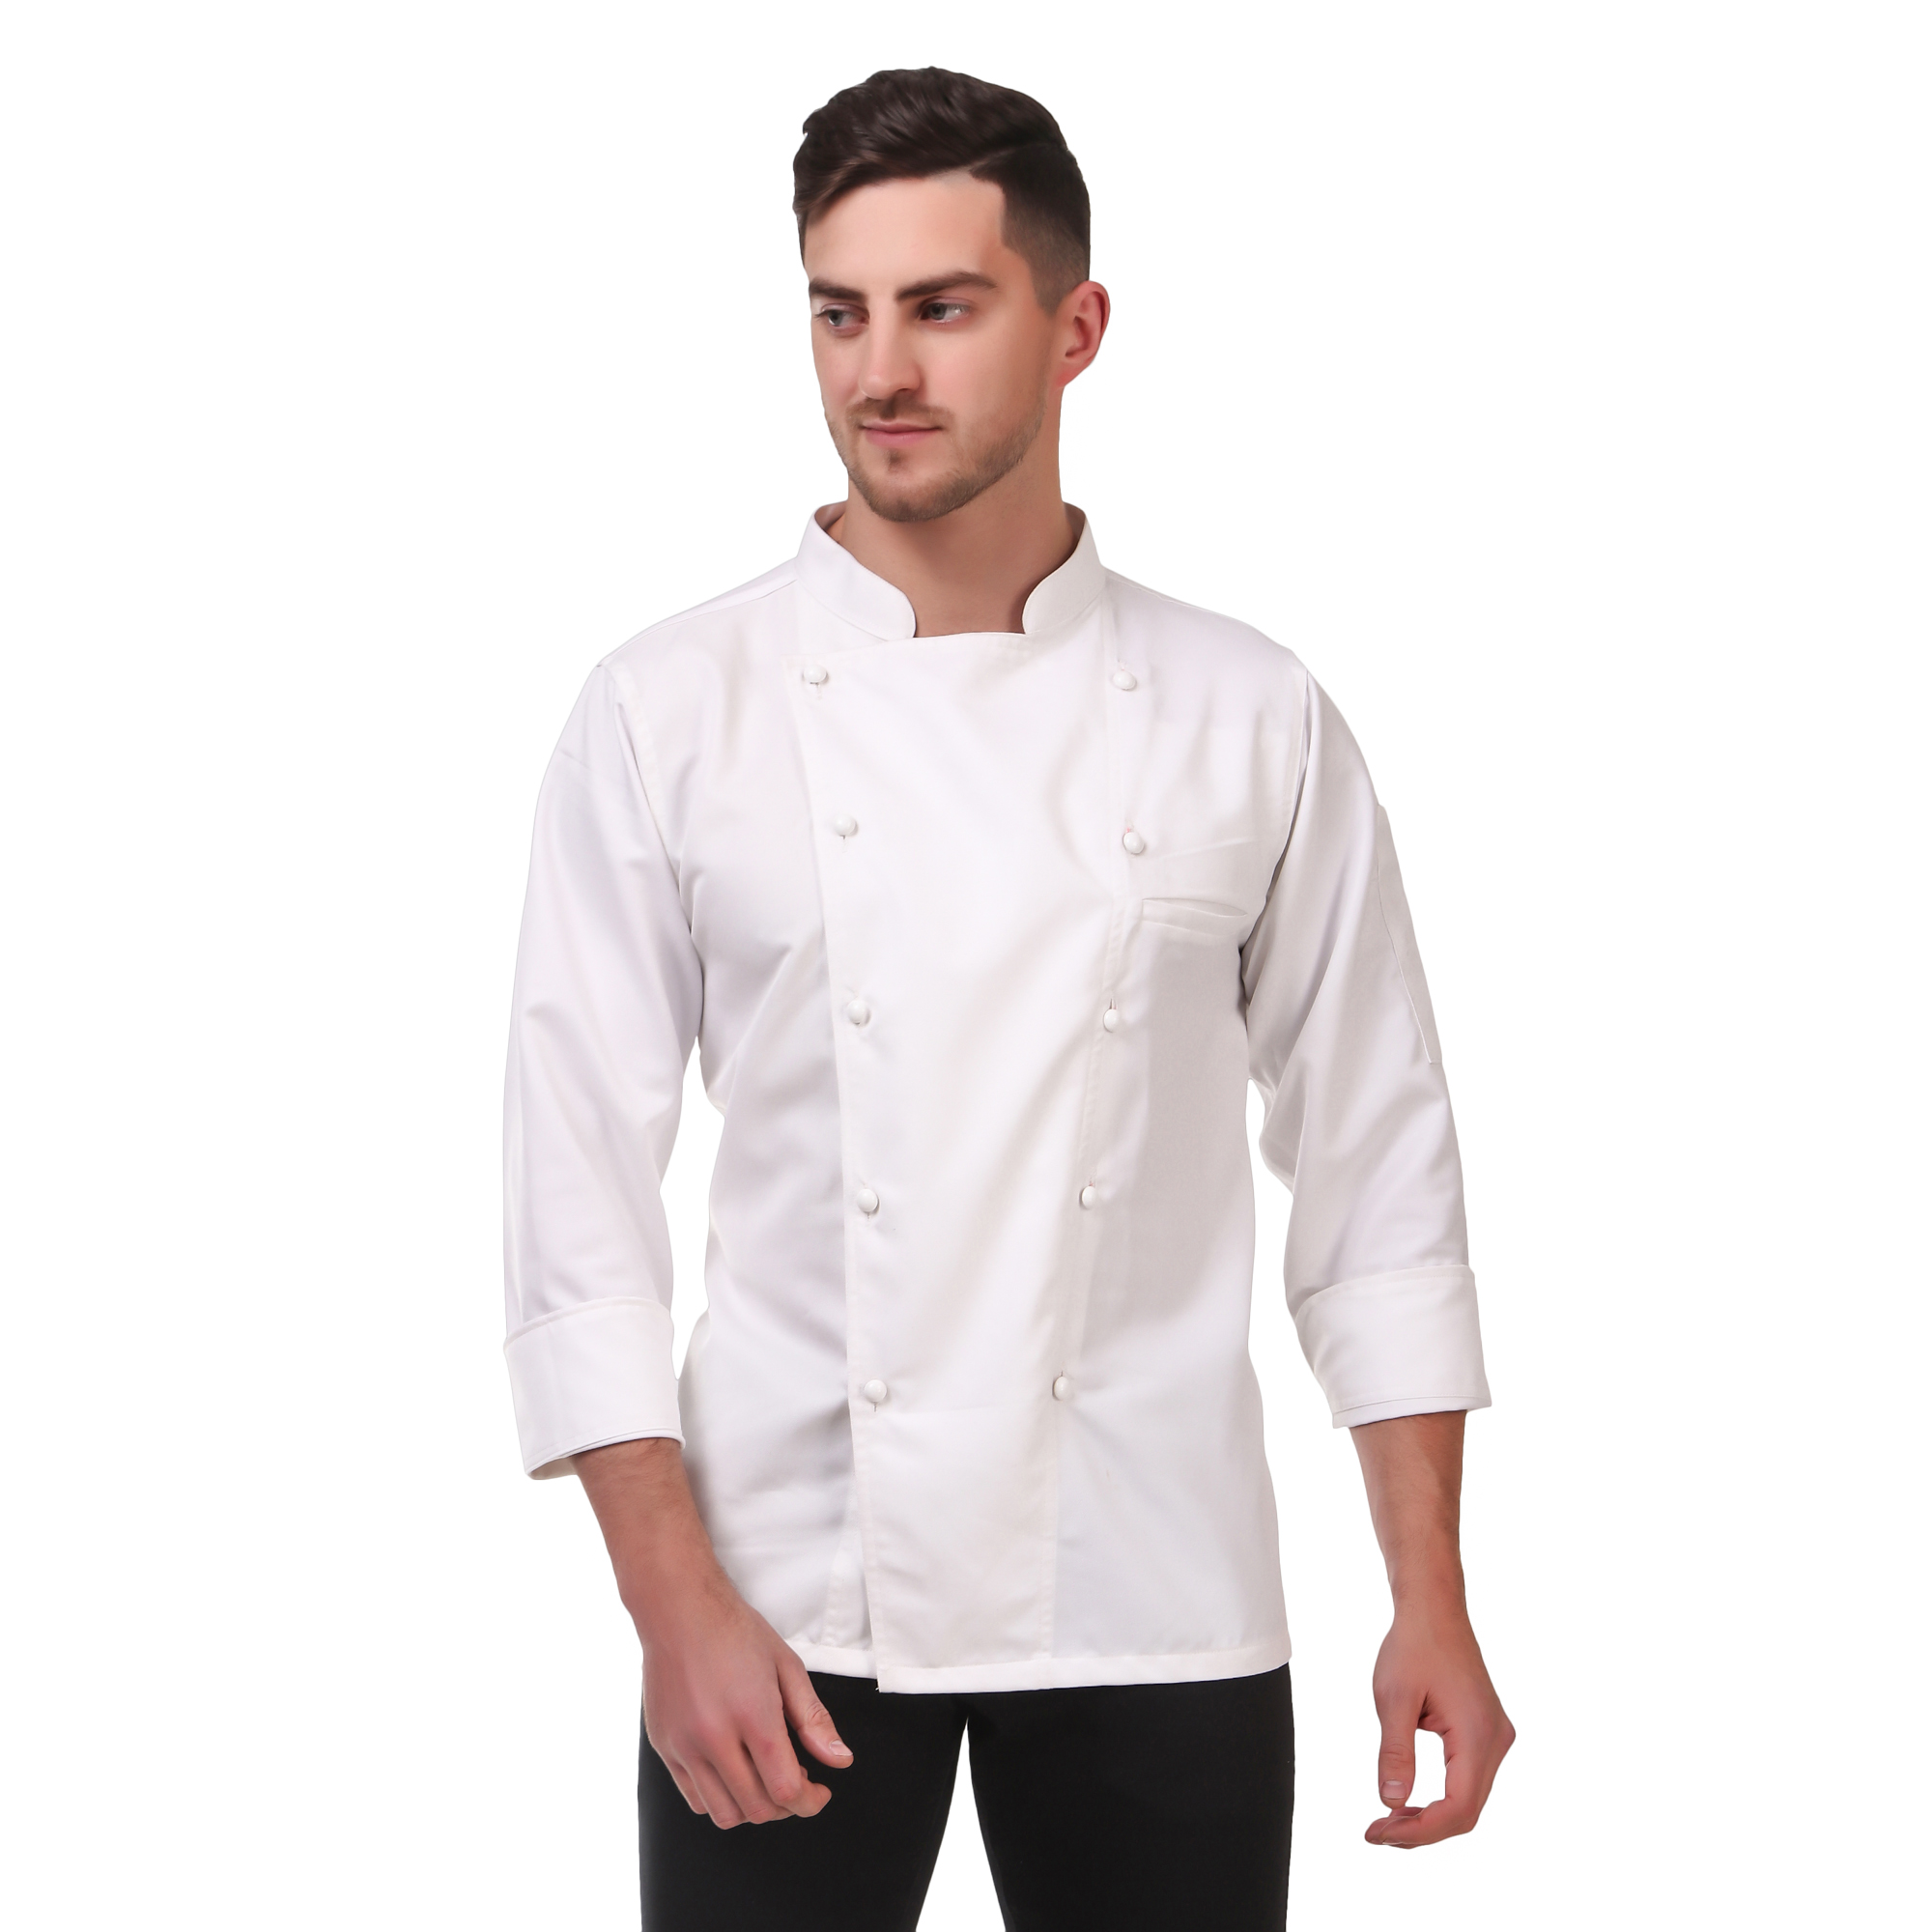 Polycotton Long Sleeved Chefs Jacket with Buttons & Pen Pocket 32" 58" White 